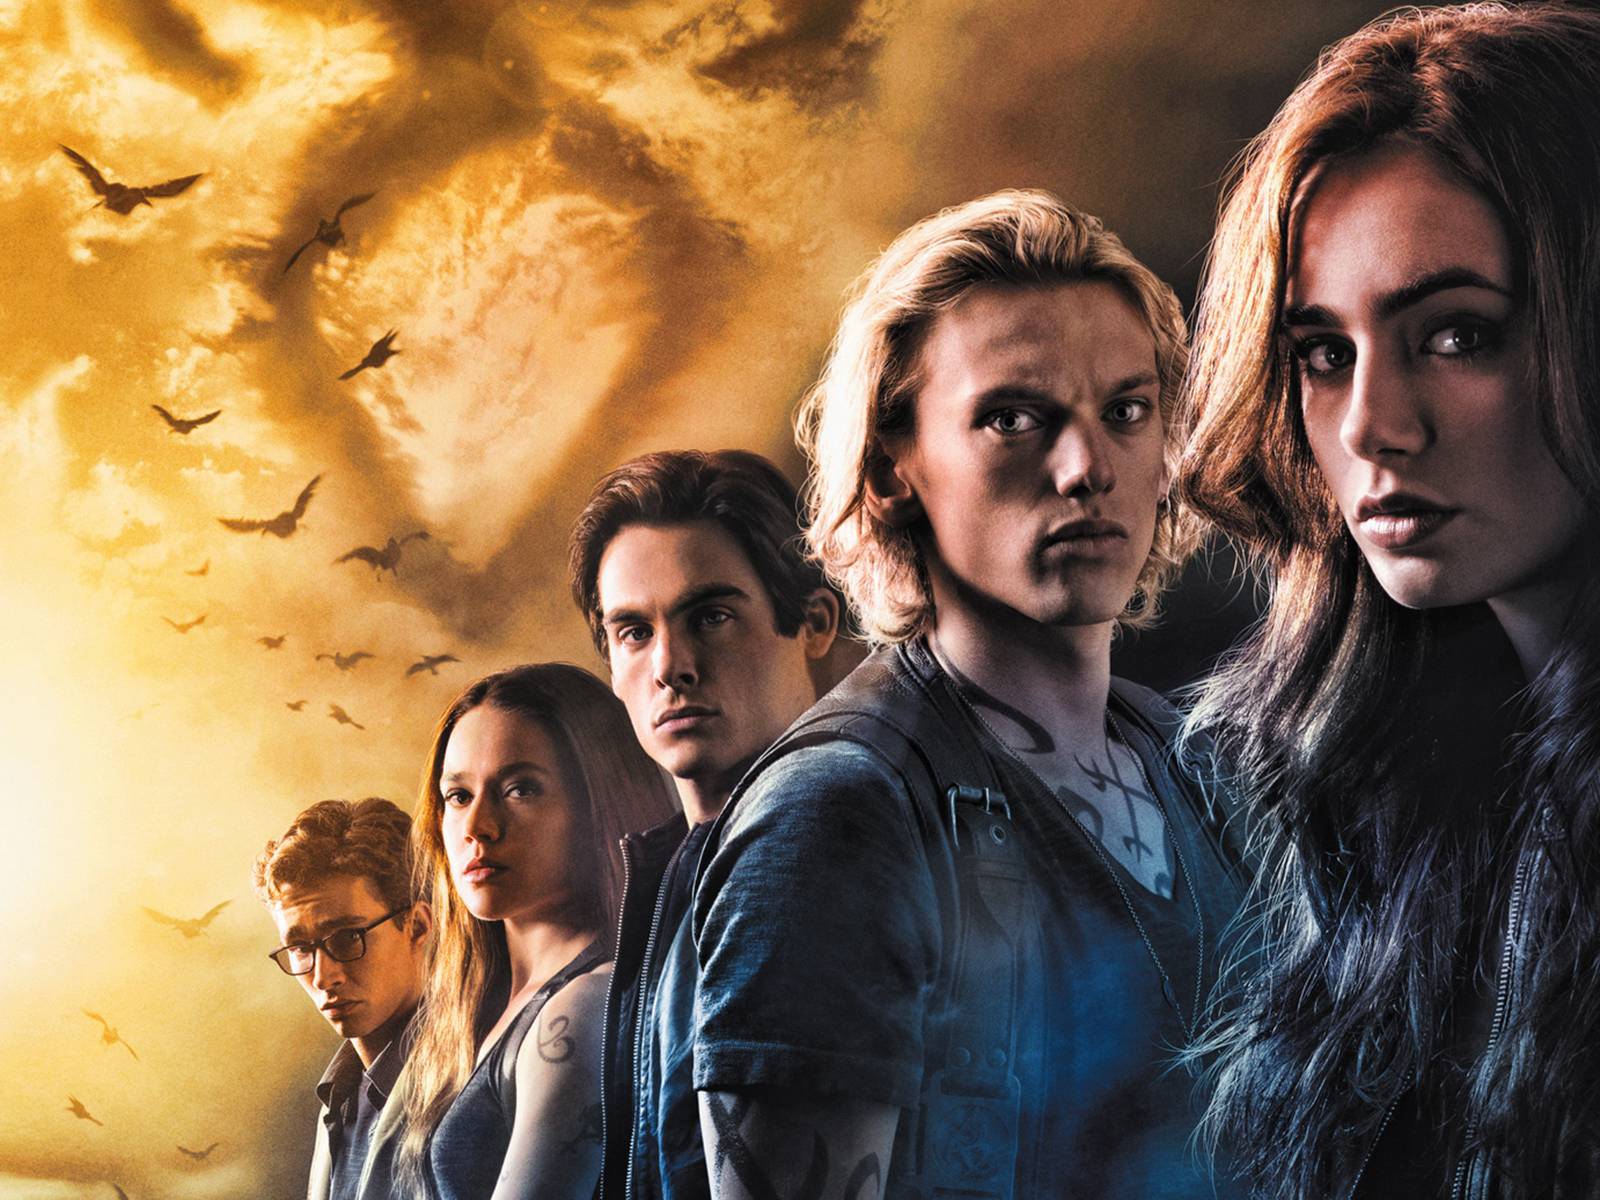 Image For > The Mortal Instruments Wallpapers